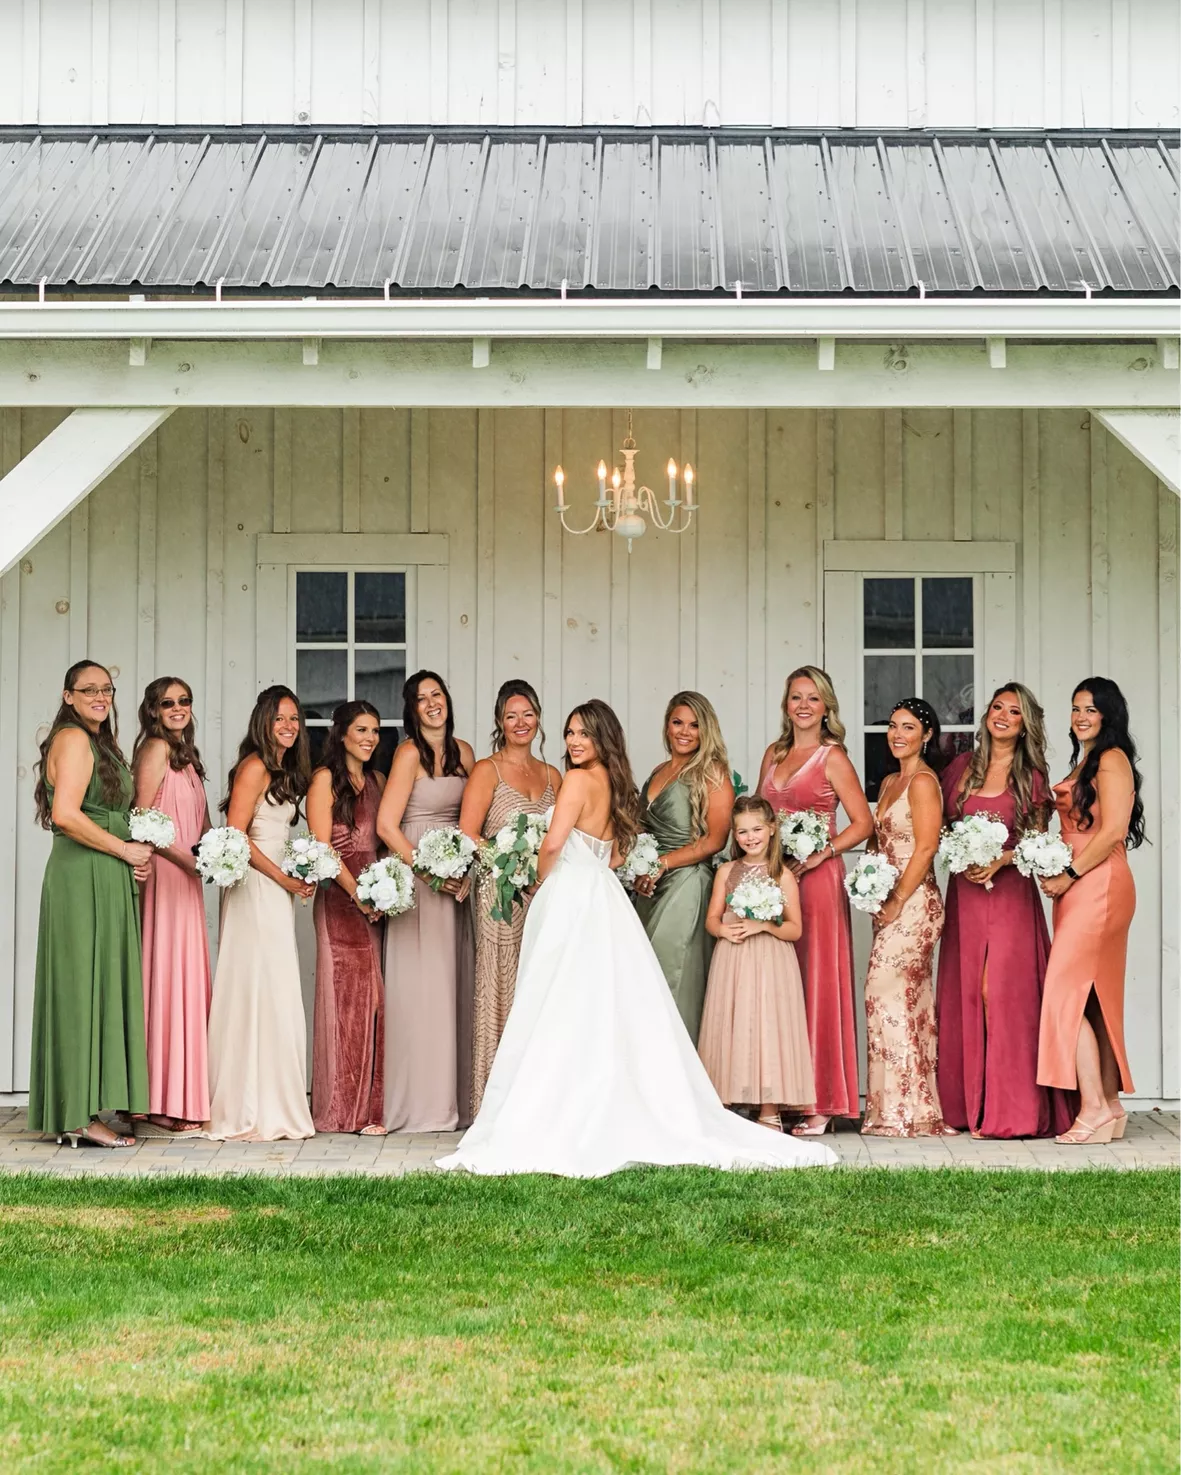 Jenny Yoo Online Store - Best Bridesmaids, Bridal Party and